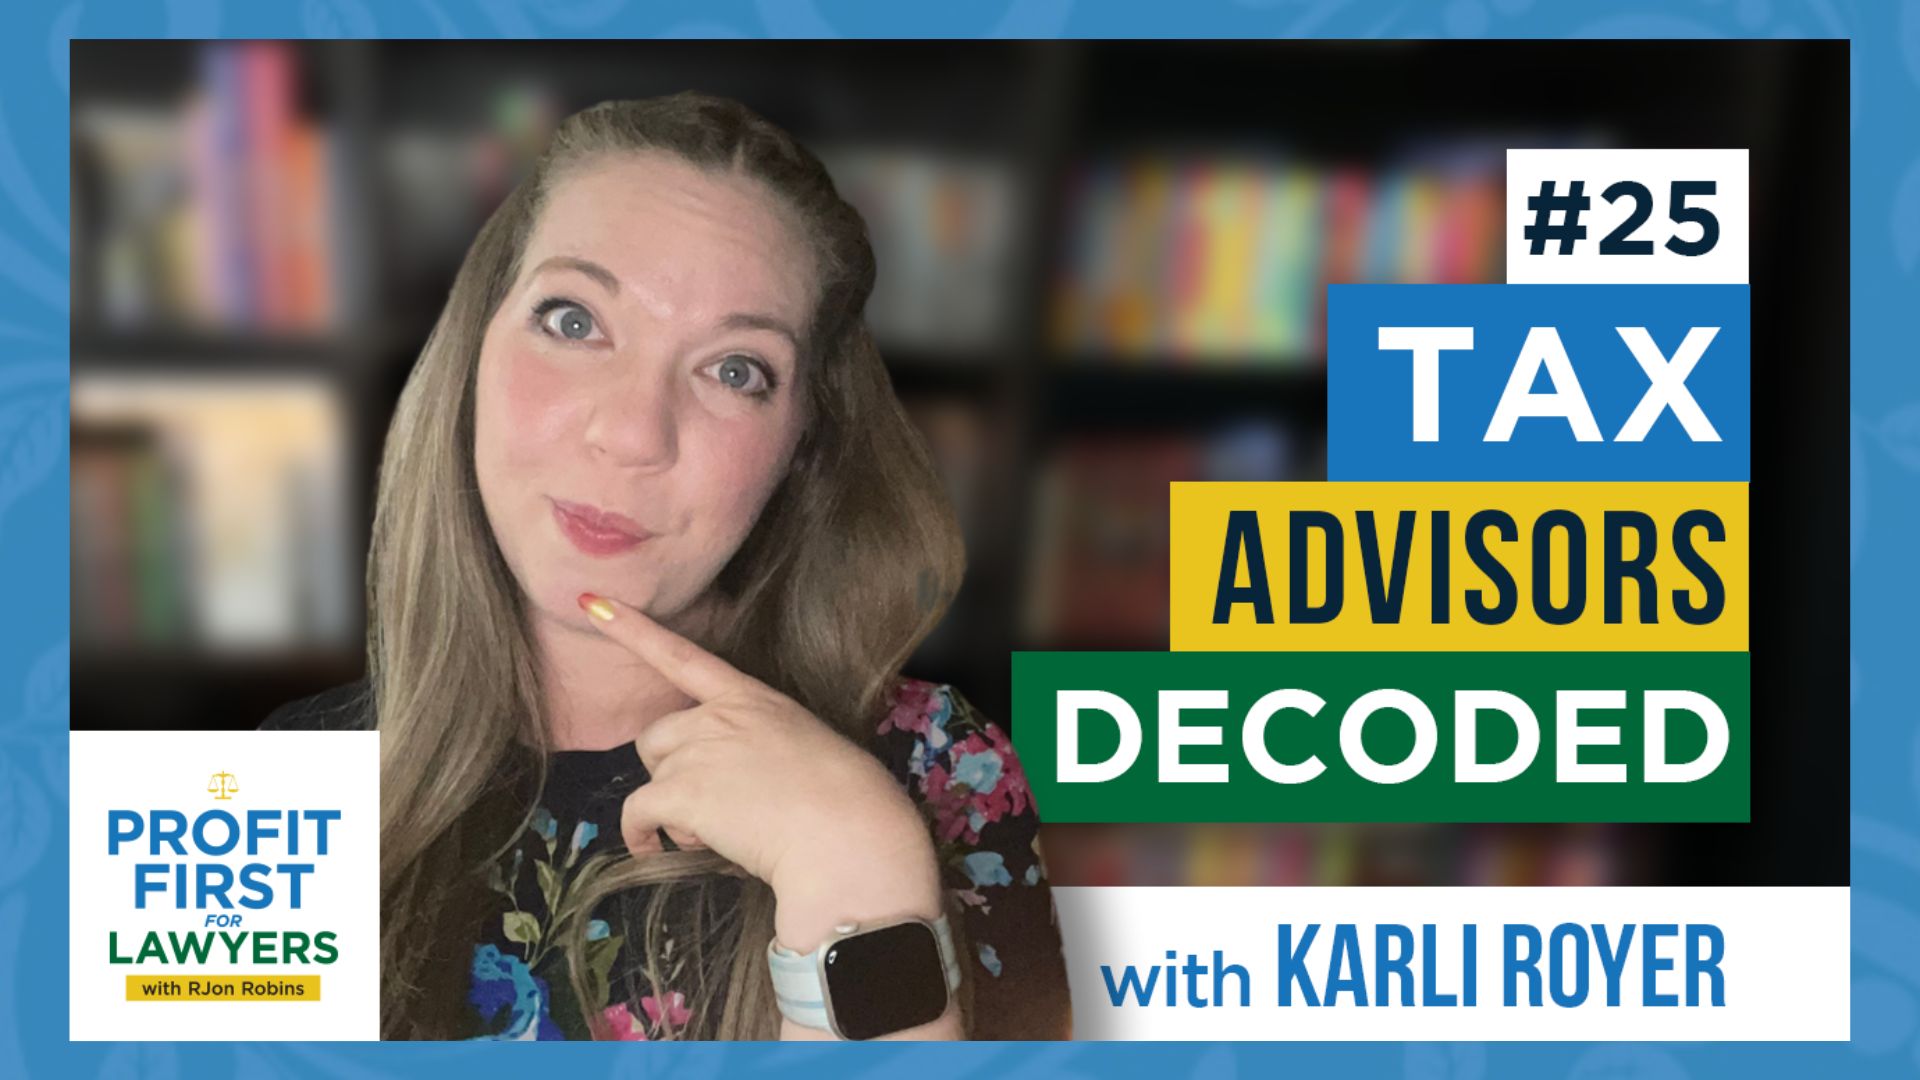 Featured Image for episode 25 of the Profit First For Lawyers podcast featuring a photo of Karli Royer with her finger on her chin. Title of episode: Tax Advisors Decoded.